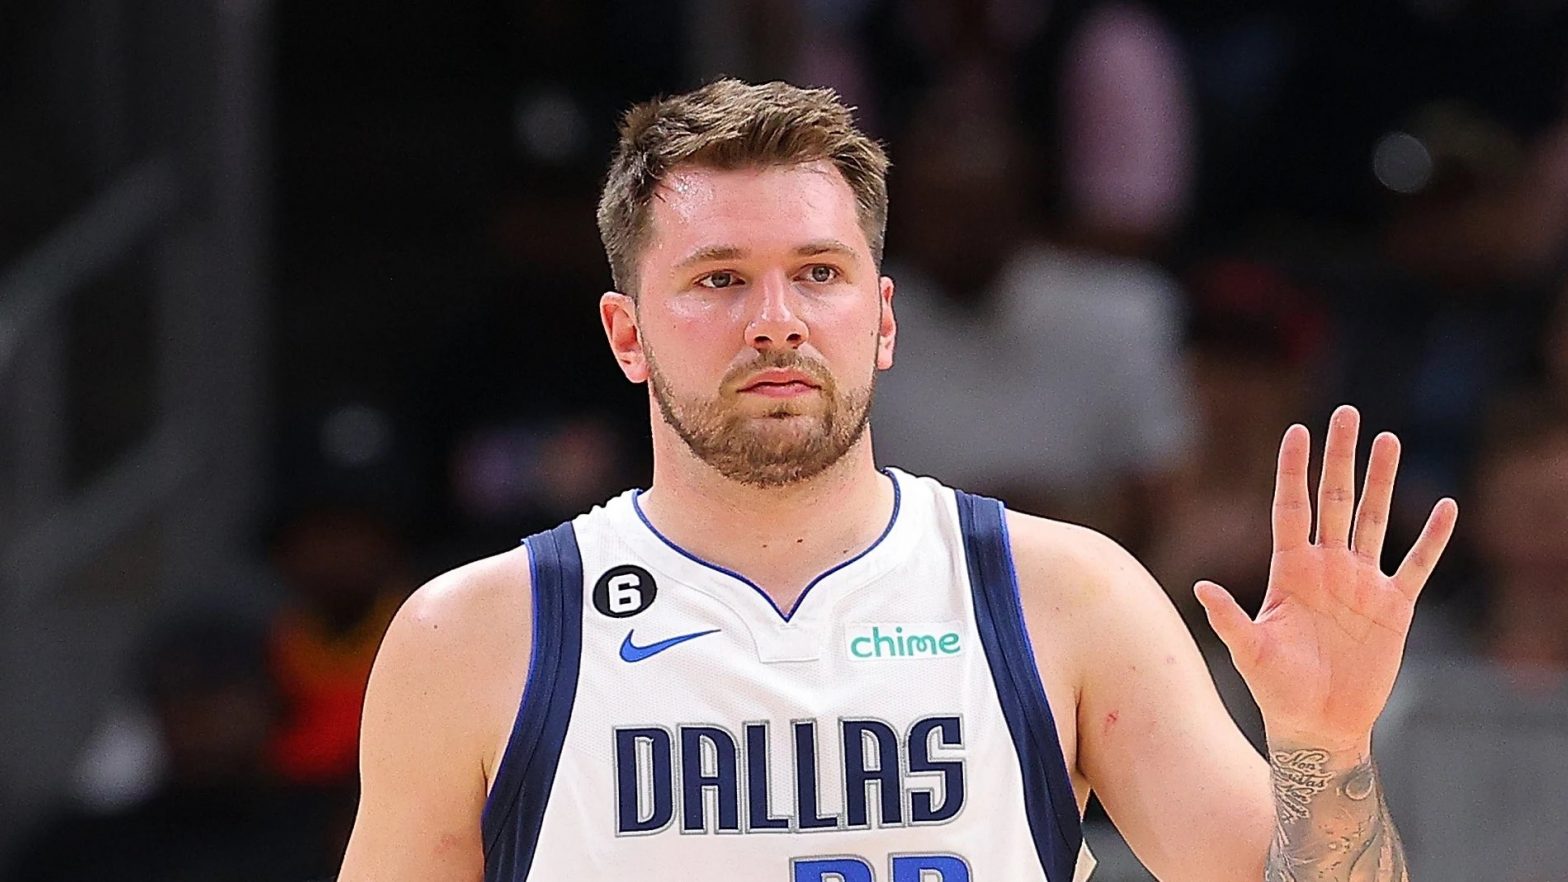 Luka Doncic parents: Who is mother Mirjam Poterbin and father Sasa Doncic?